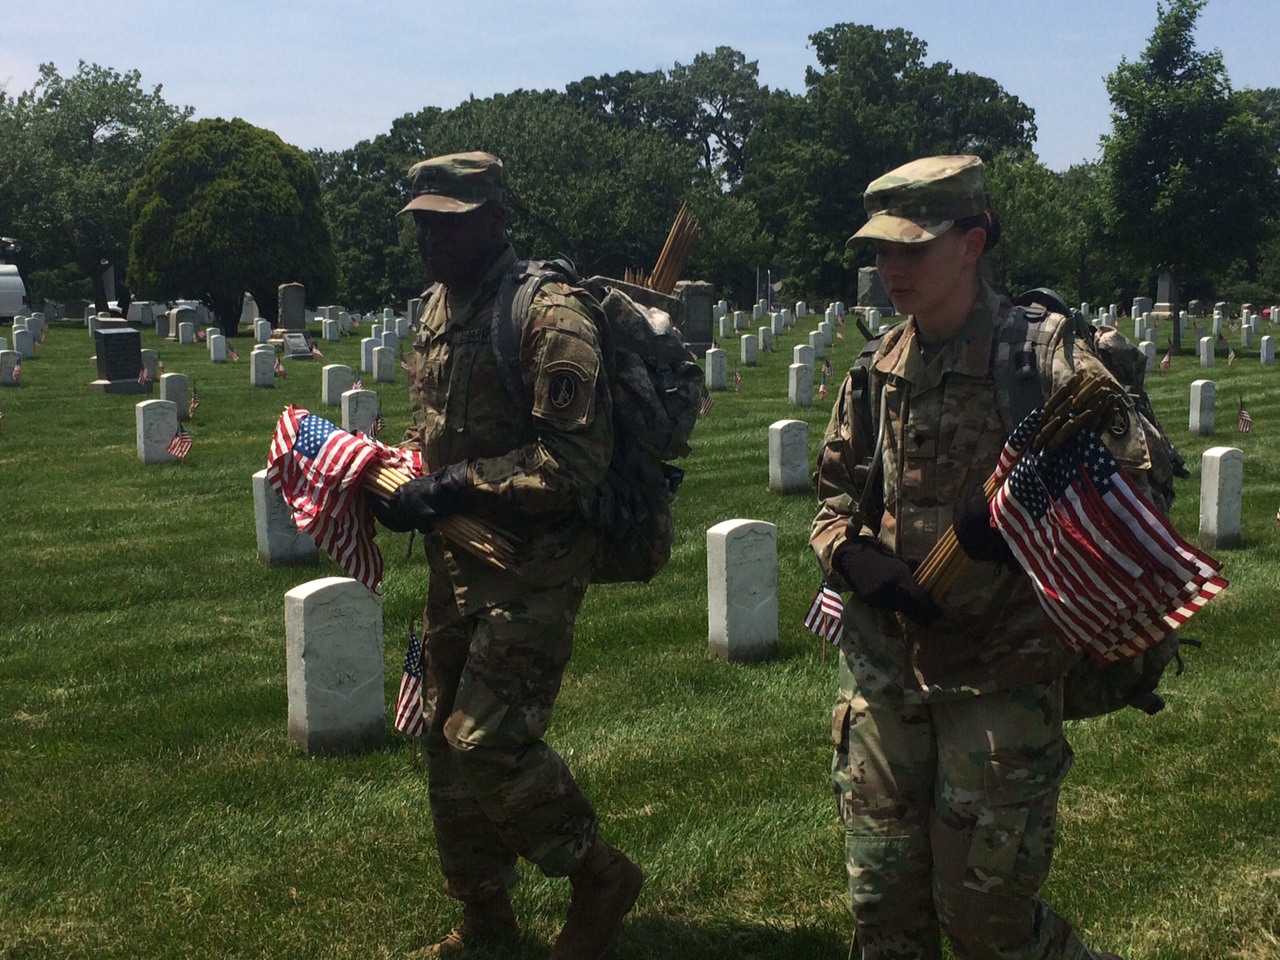 Soldiers in the 3rd U.S. Infantry Regiment carry flags through Arlington National Cemetery on Thursday, May 26, 2016. Before Memorial Day weekend each year, the Old Guard places hundreds of thousands of flags at the cemetery to honor fallen soldiers. (WTOP/Rachel Nania)